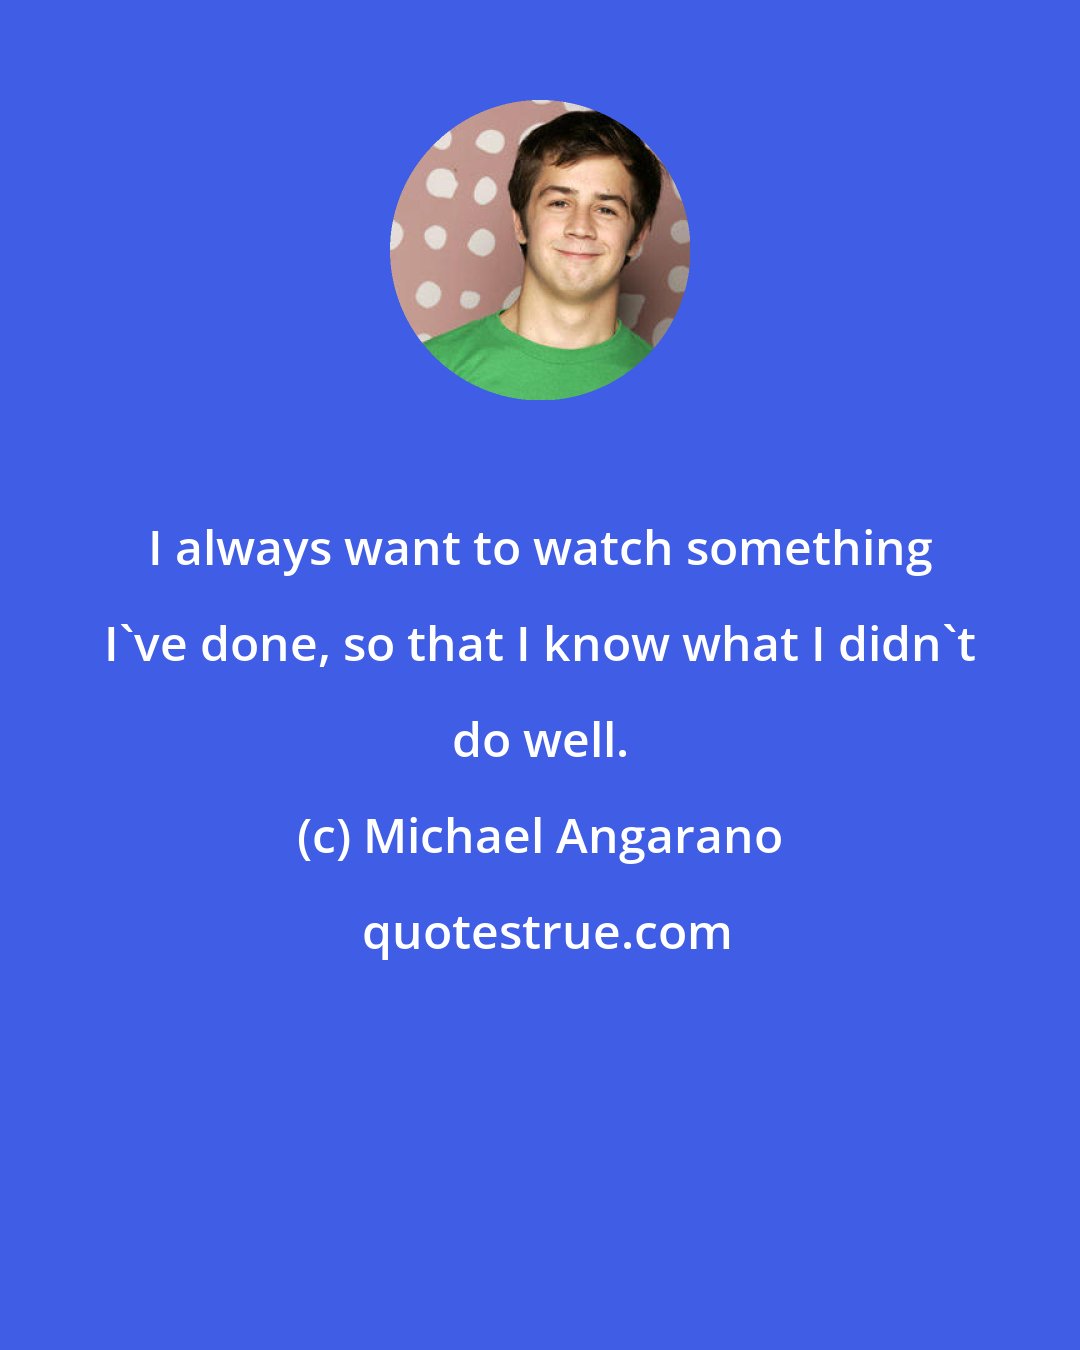 Michael Angarano: I always want to watch something I've done, so that I know what I didn't do well.